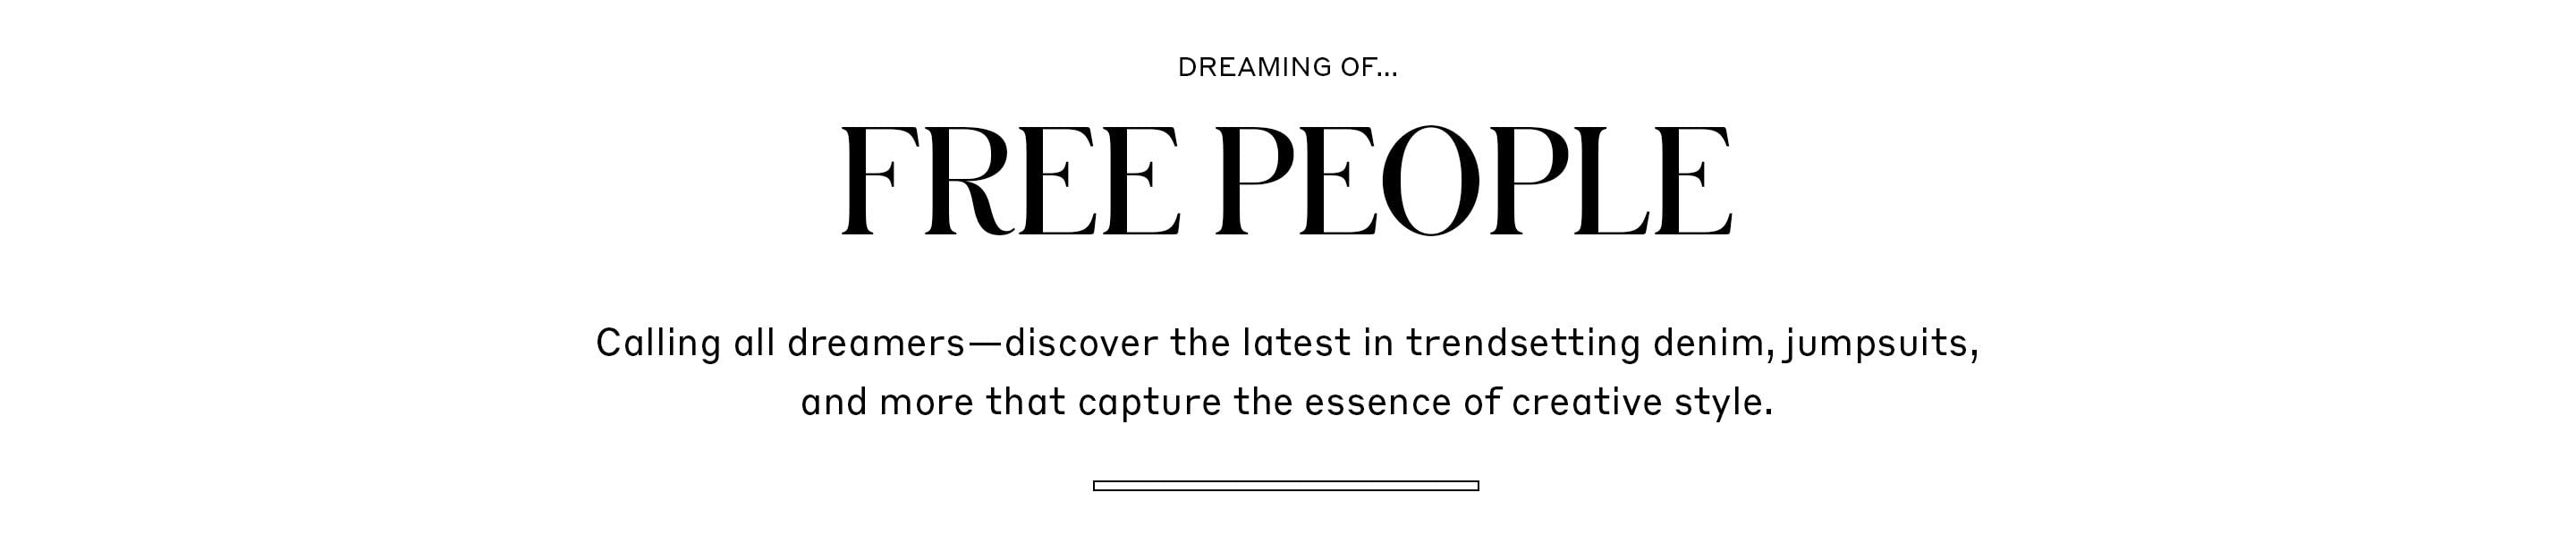 Free People - Calling all dreamers—discover the latest in trendsetting denim, jumpsuits, and more that capture the essence of creative style.